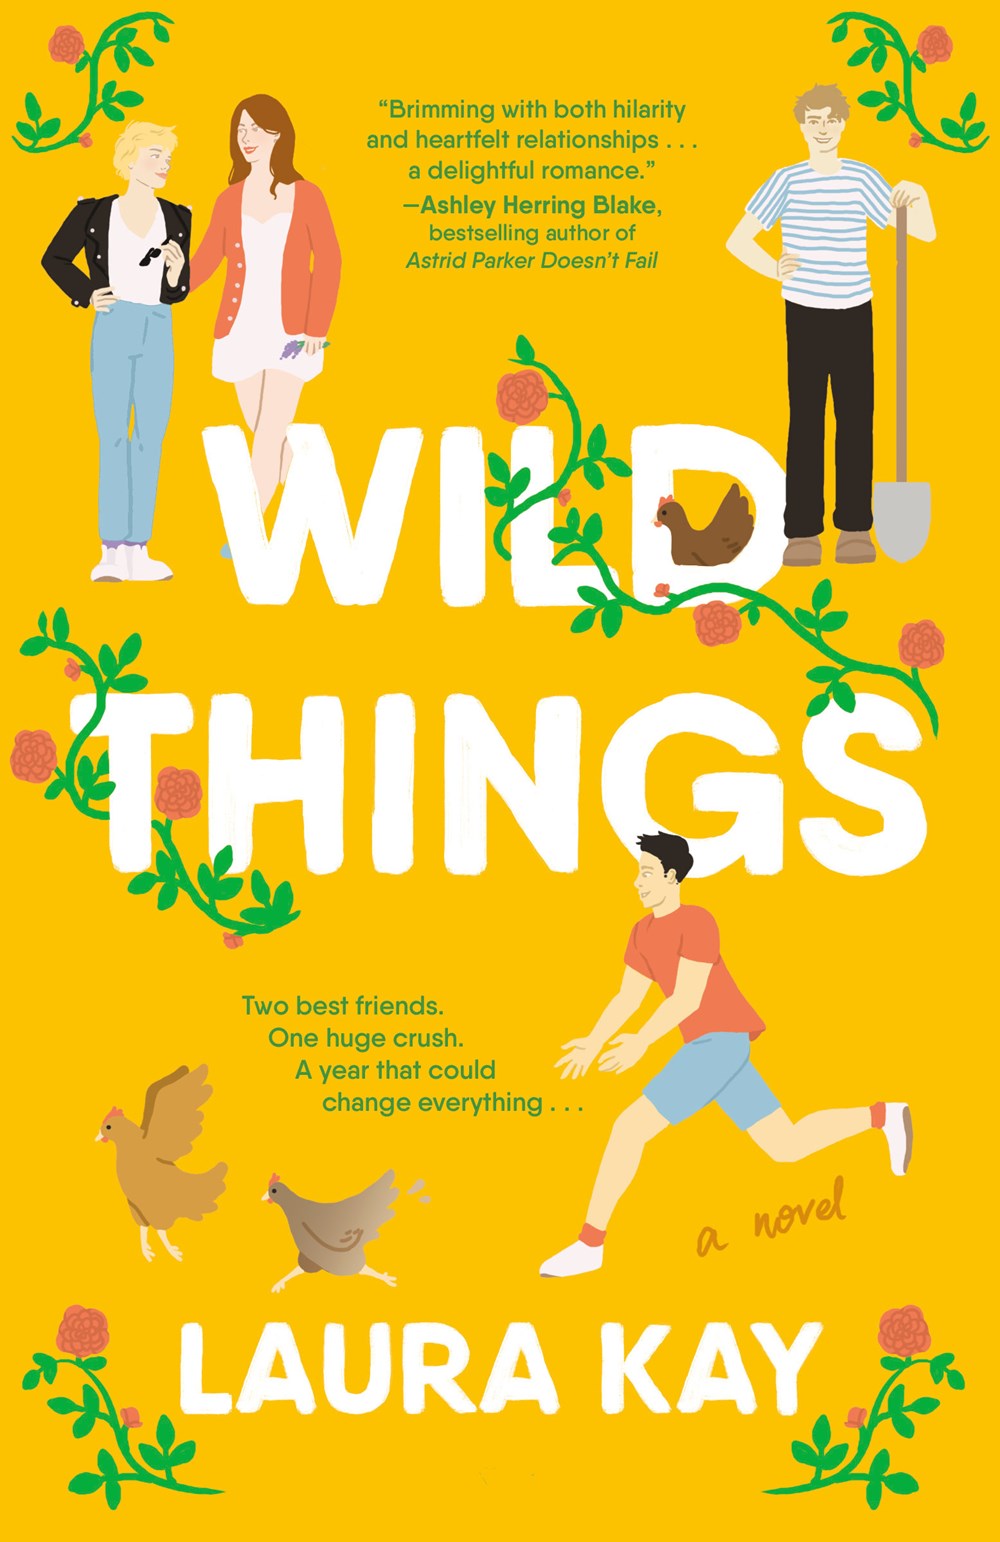 Wild Things cover image